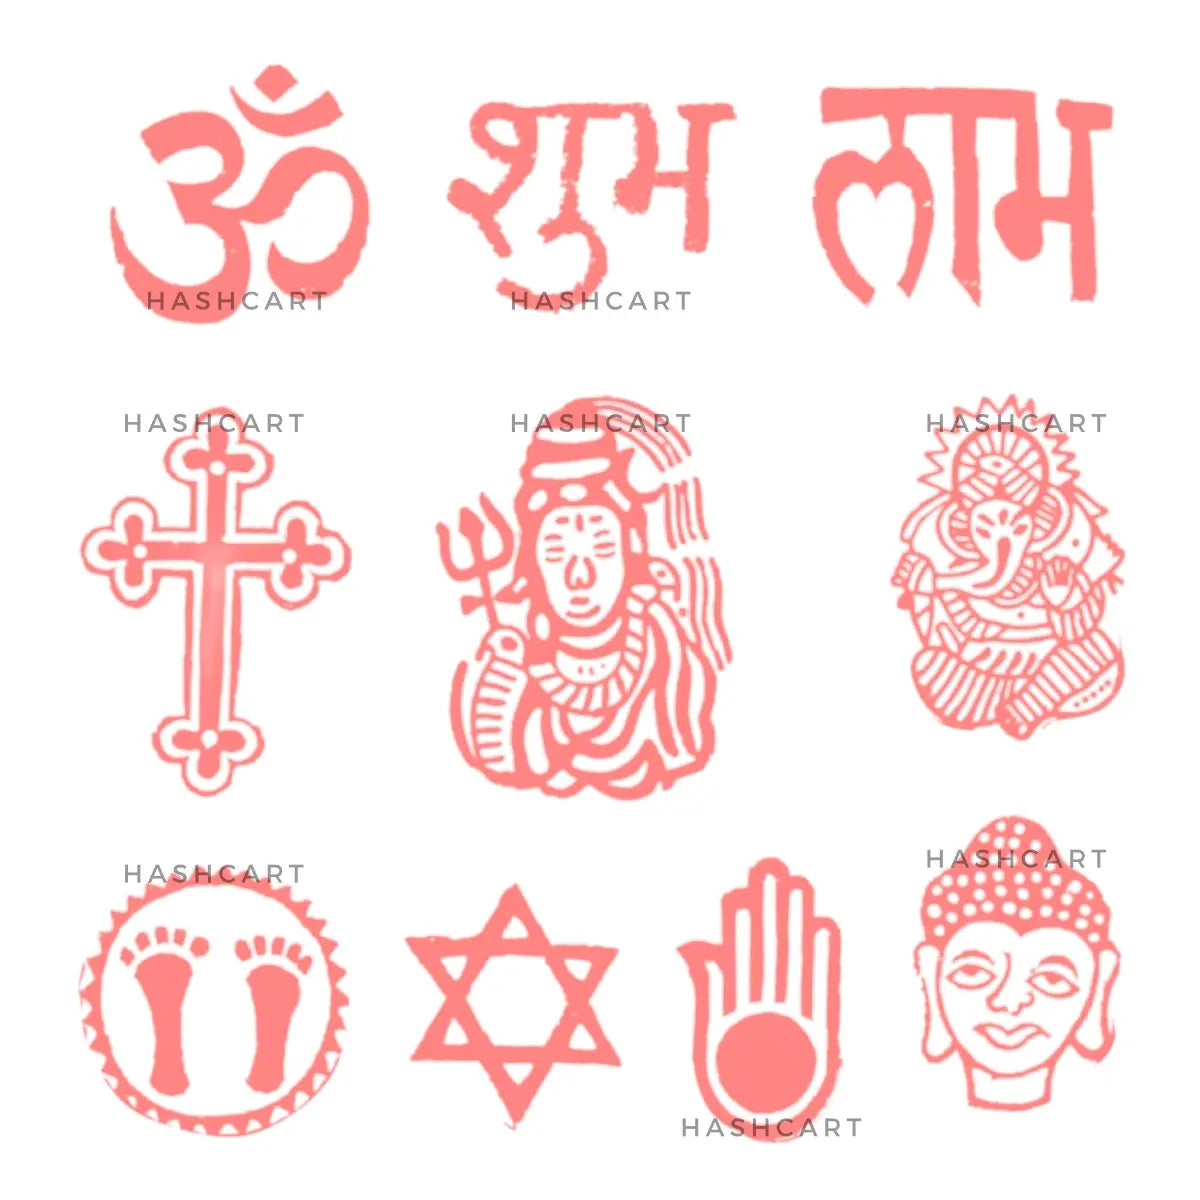 Wooden Religious Stamps